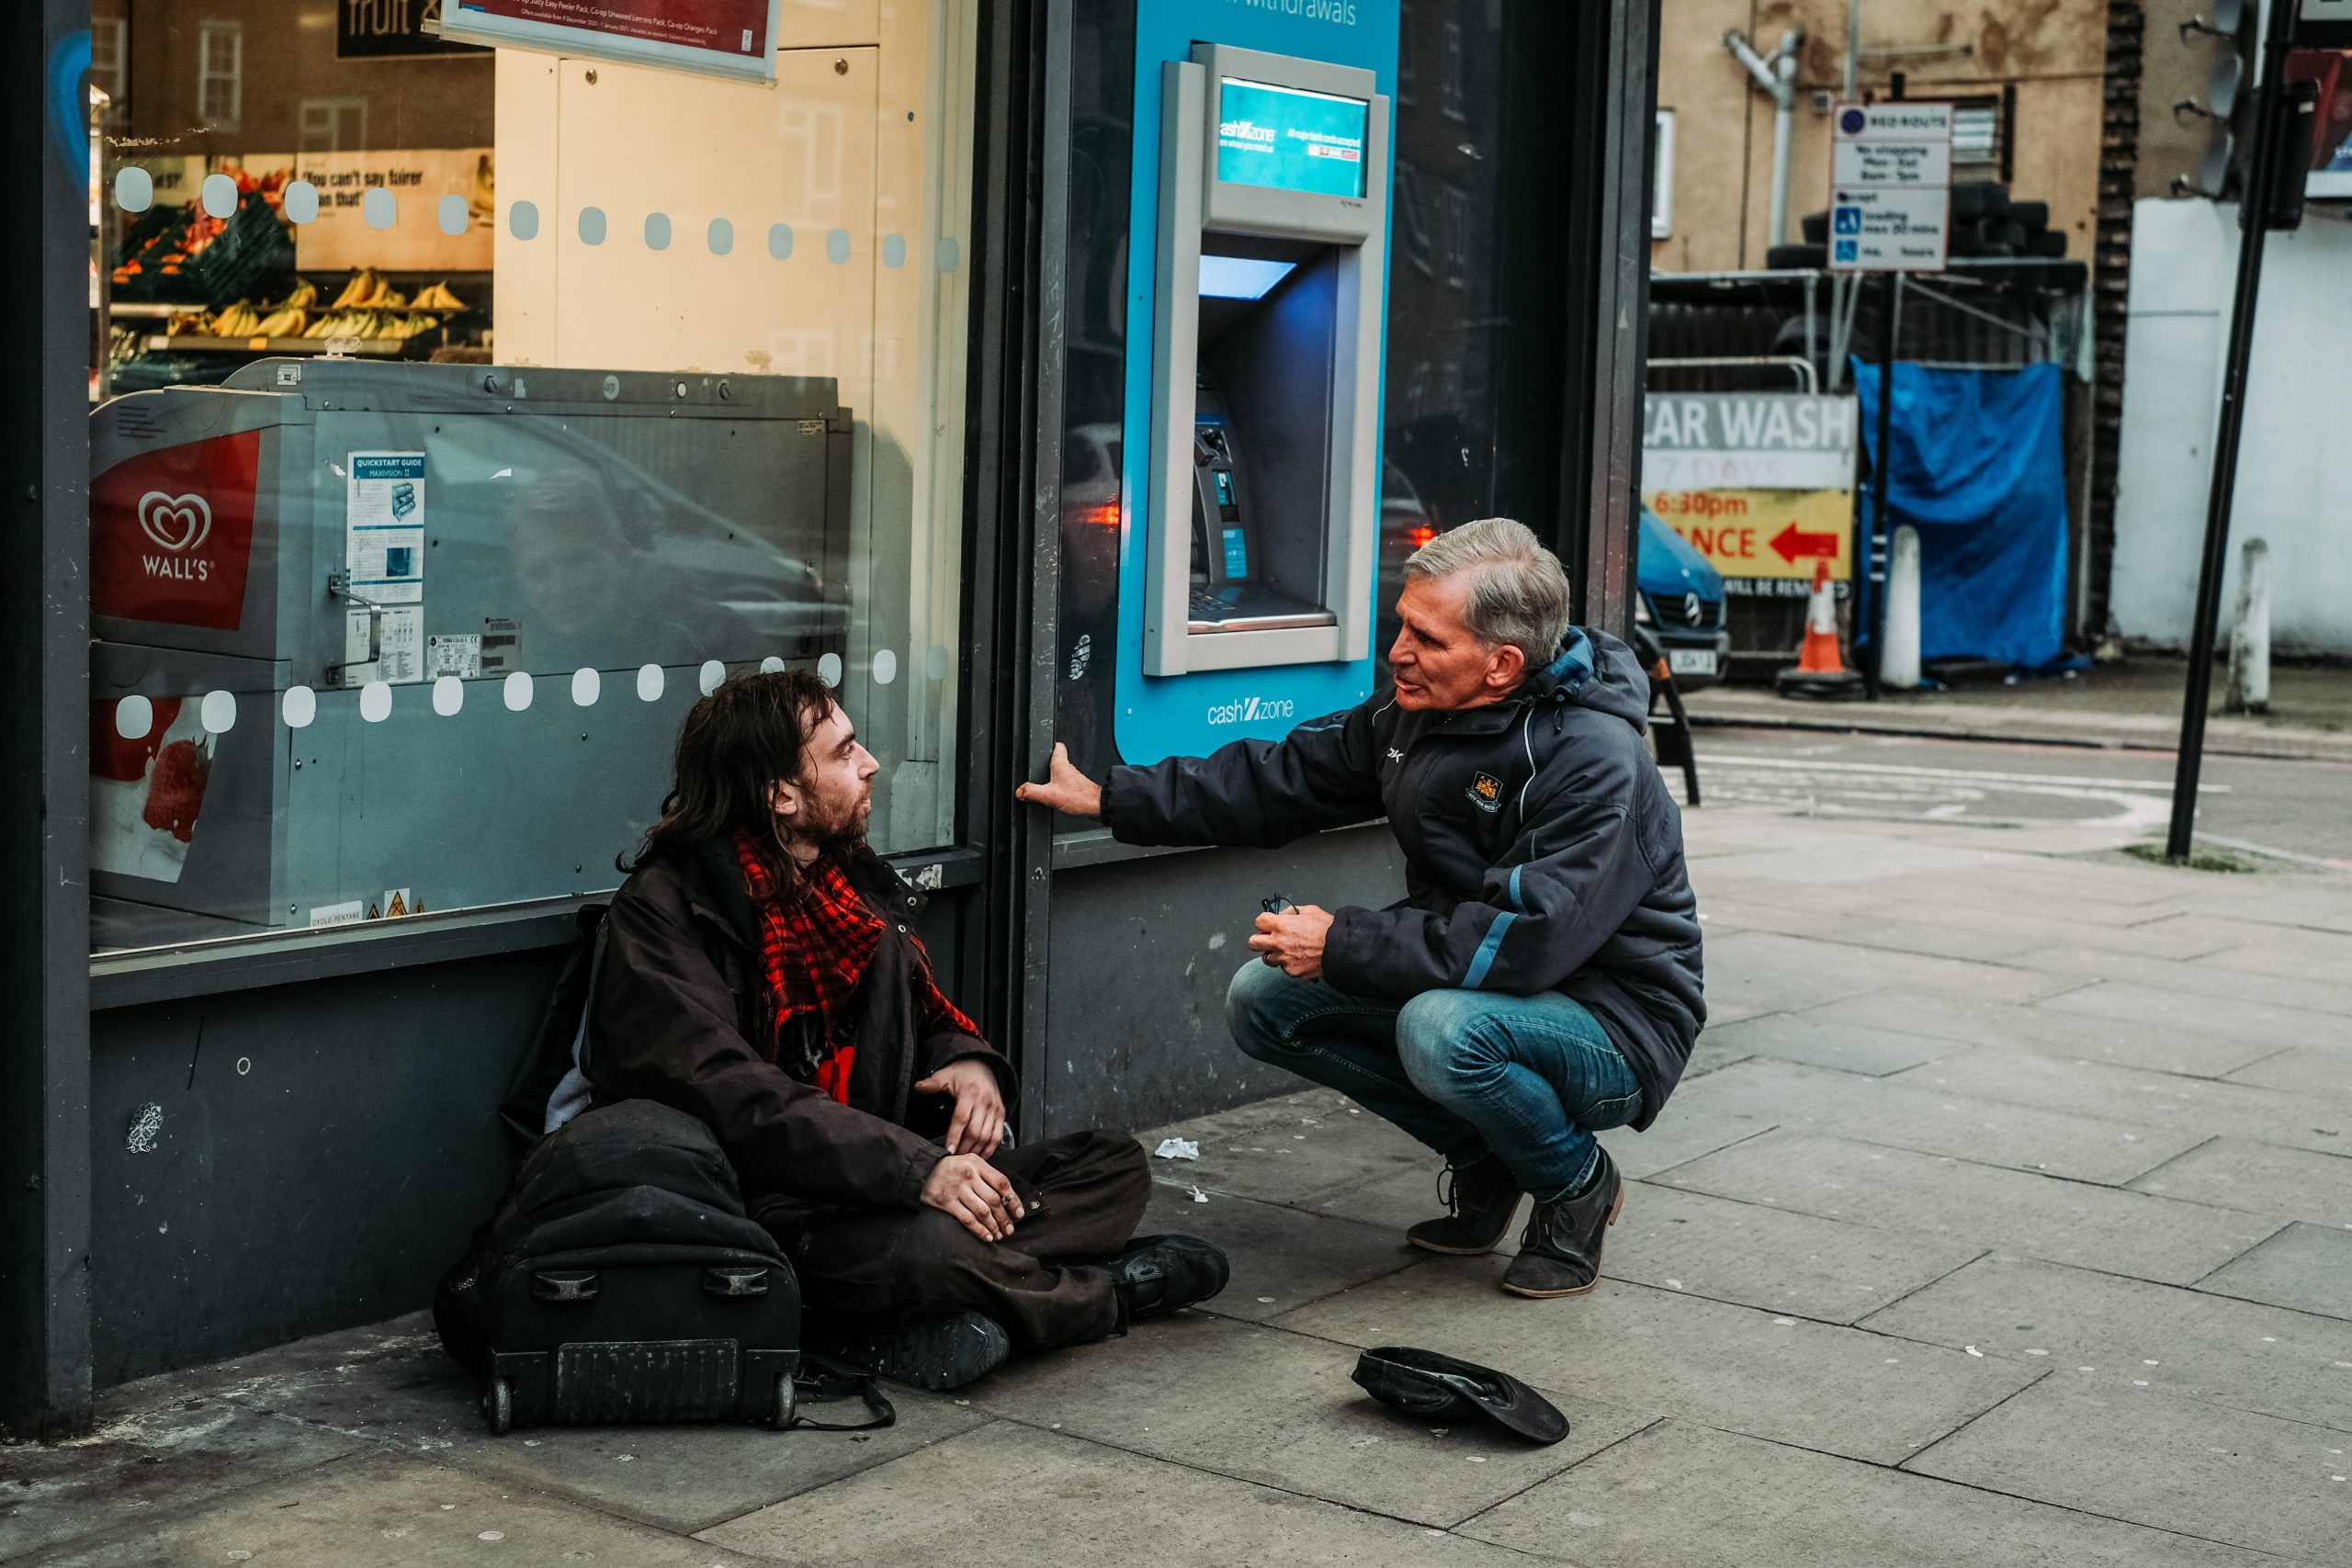 Stephen talking to a homeless man sitting on a street next to a cash point